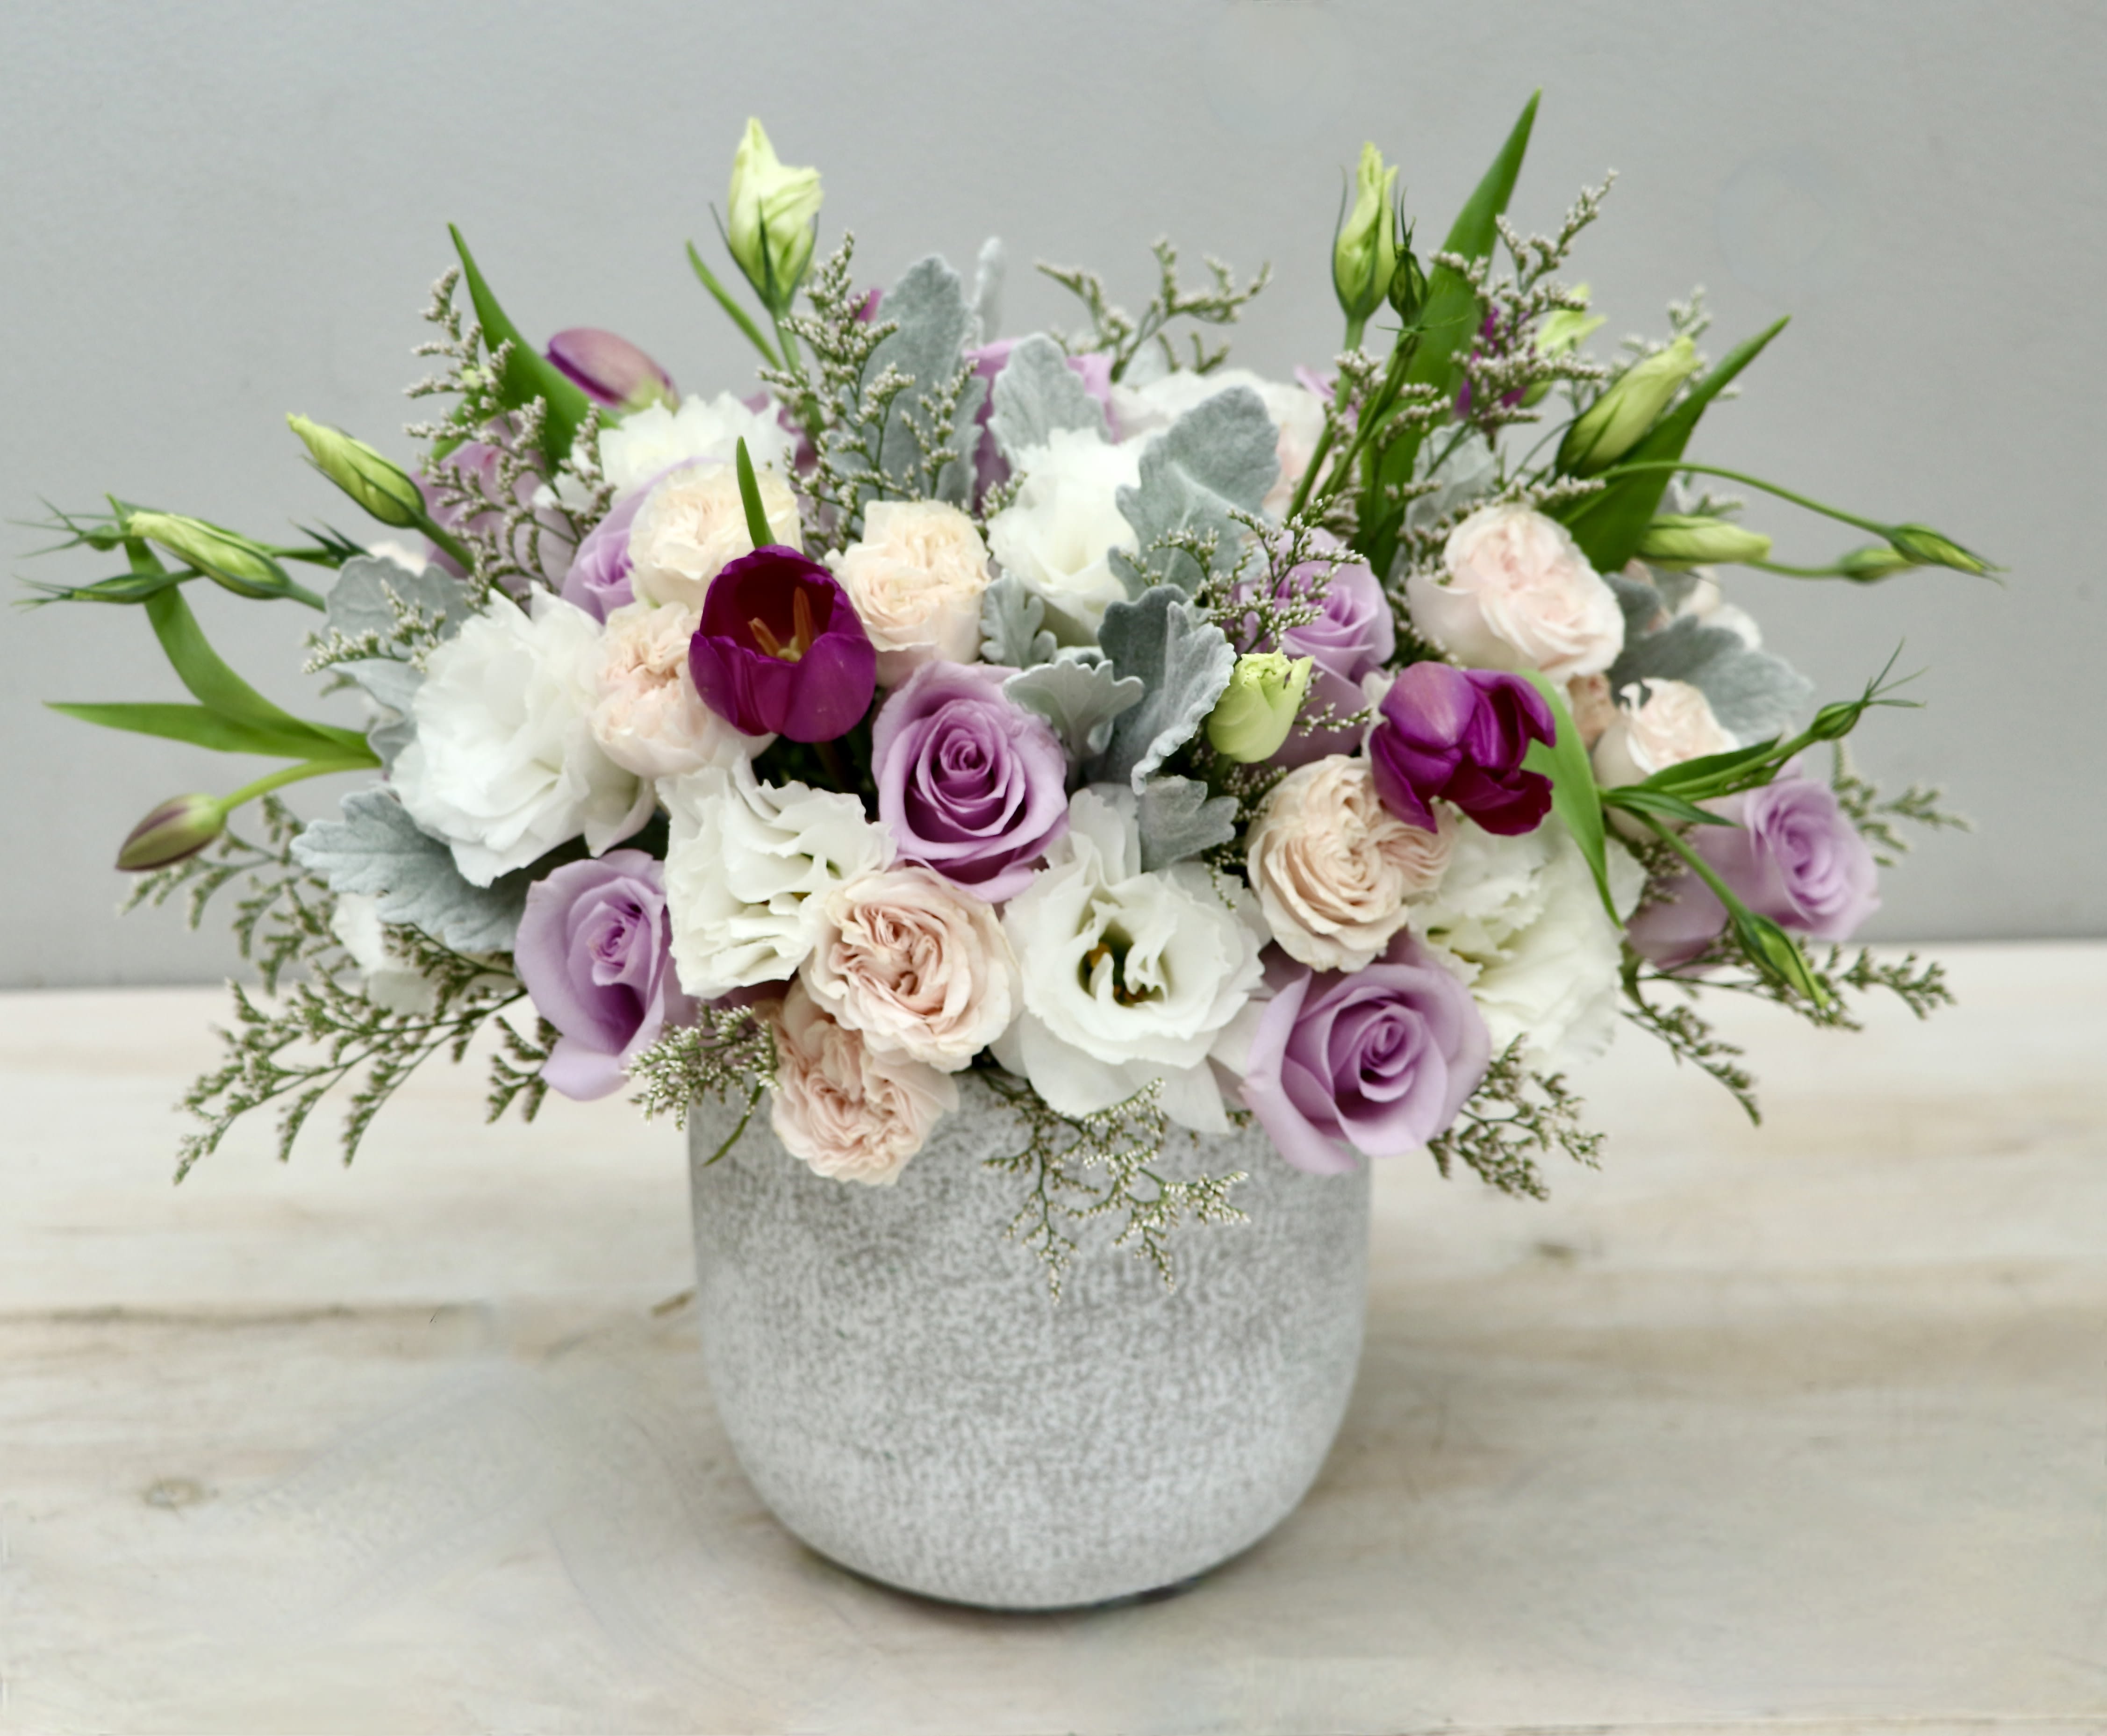 Amethyst Frost - My Glendale Florist - This arrangement combines white and blush flowers with purple toned roses and tulips. 